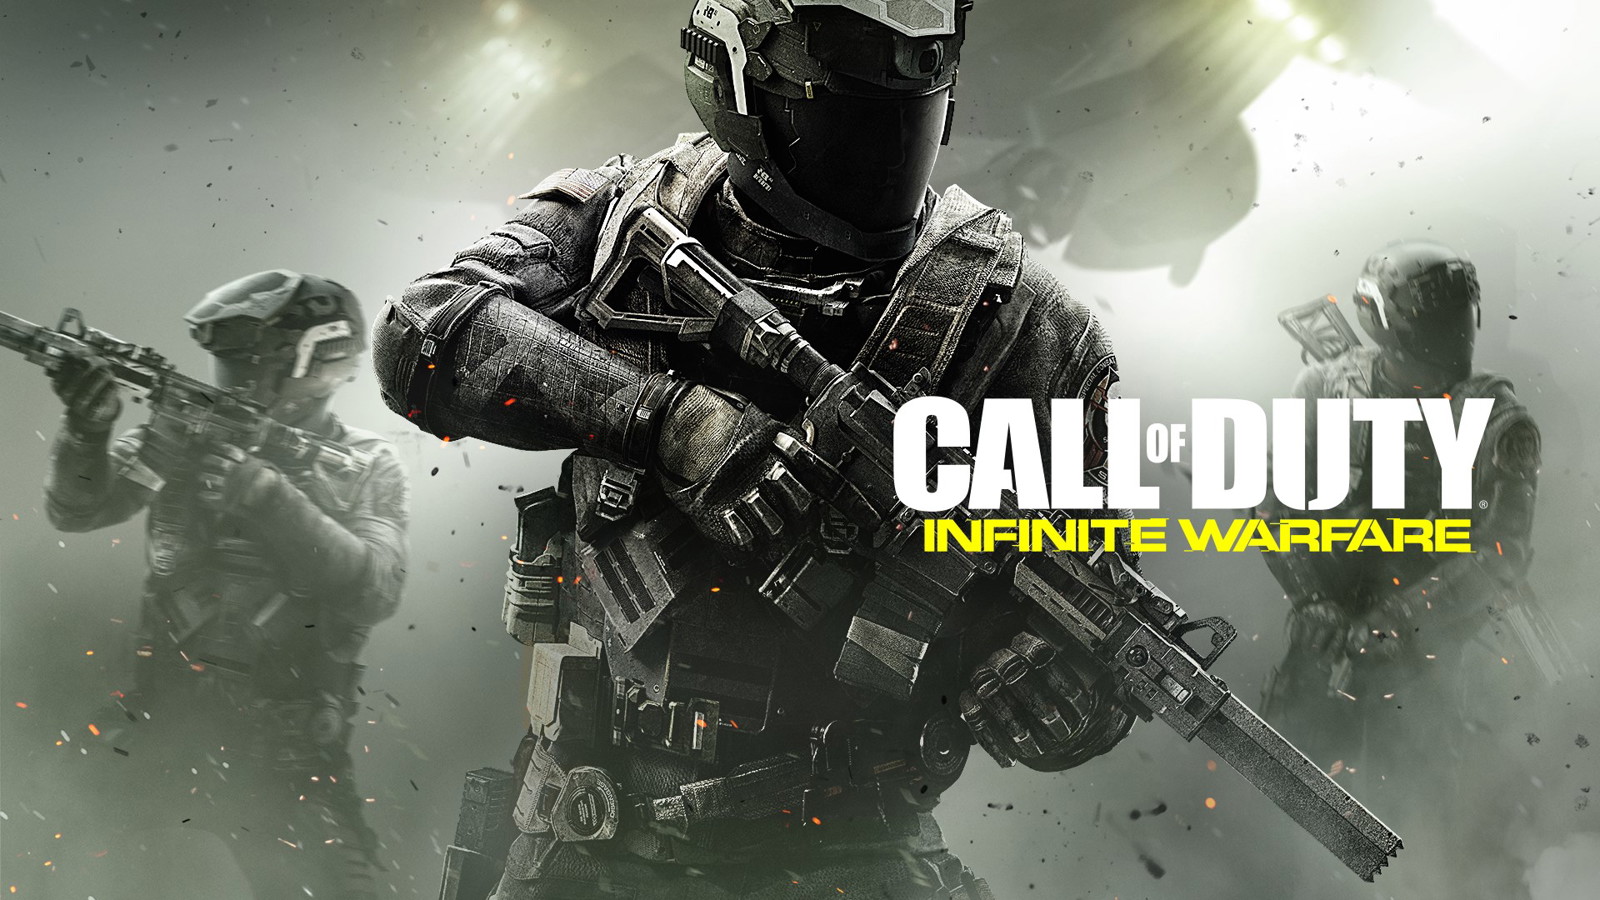 Call of Duty: Infinity Warfare was hated before it even released.